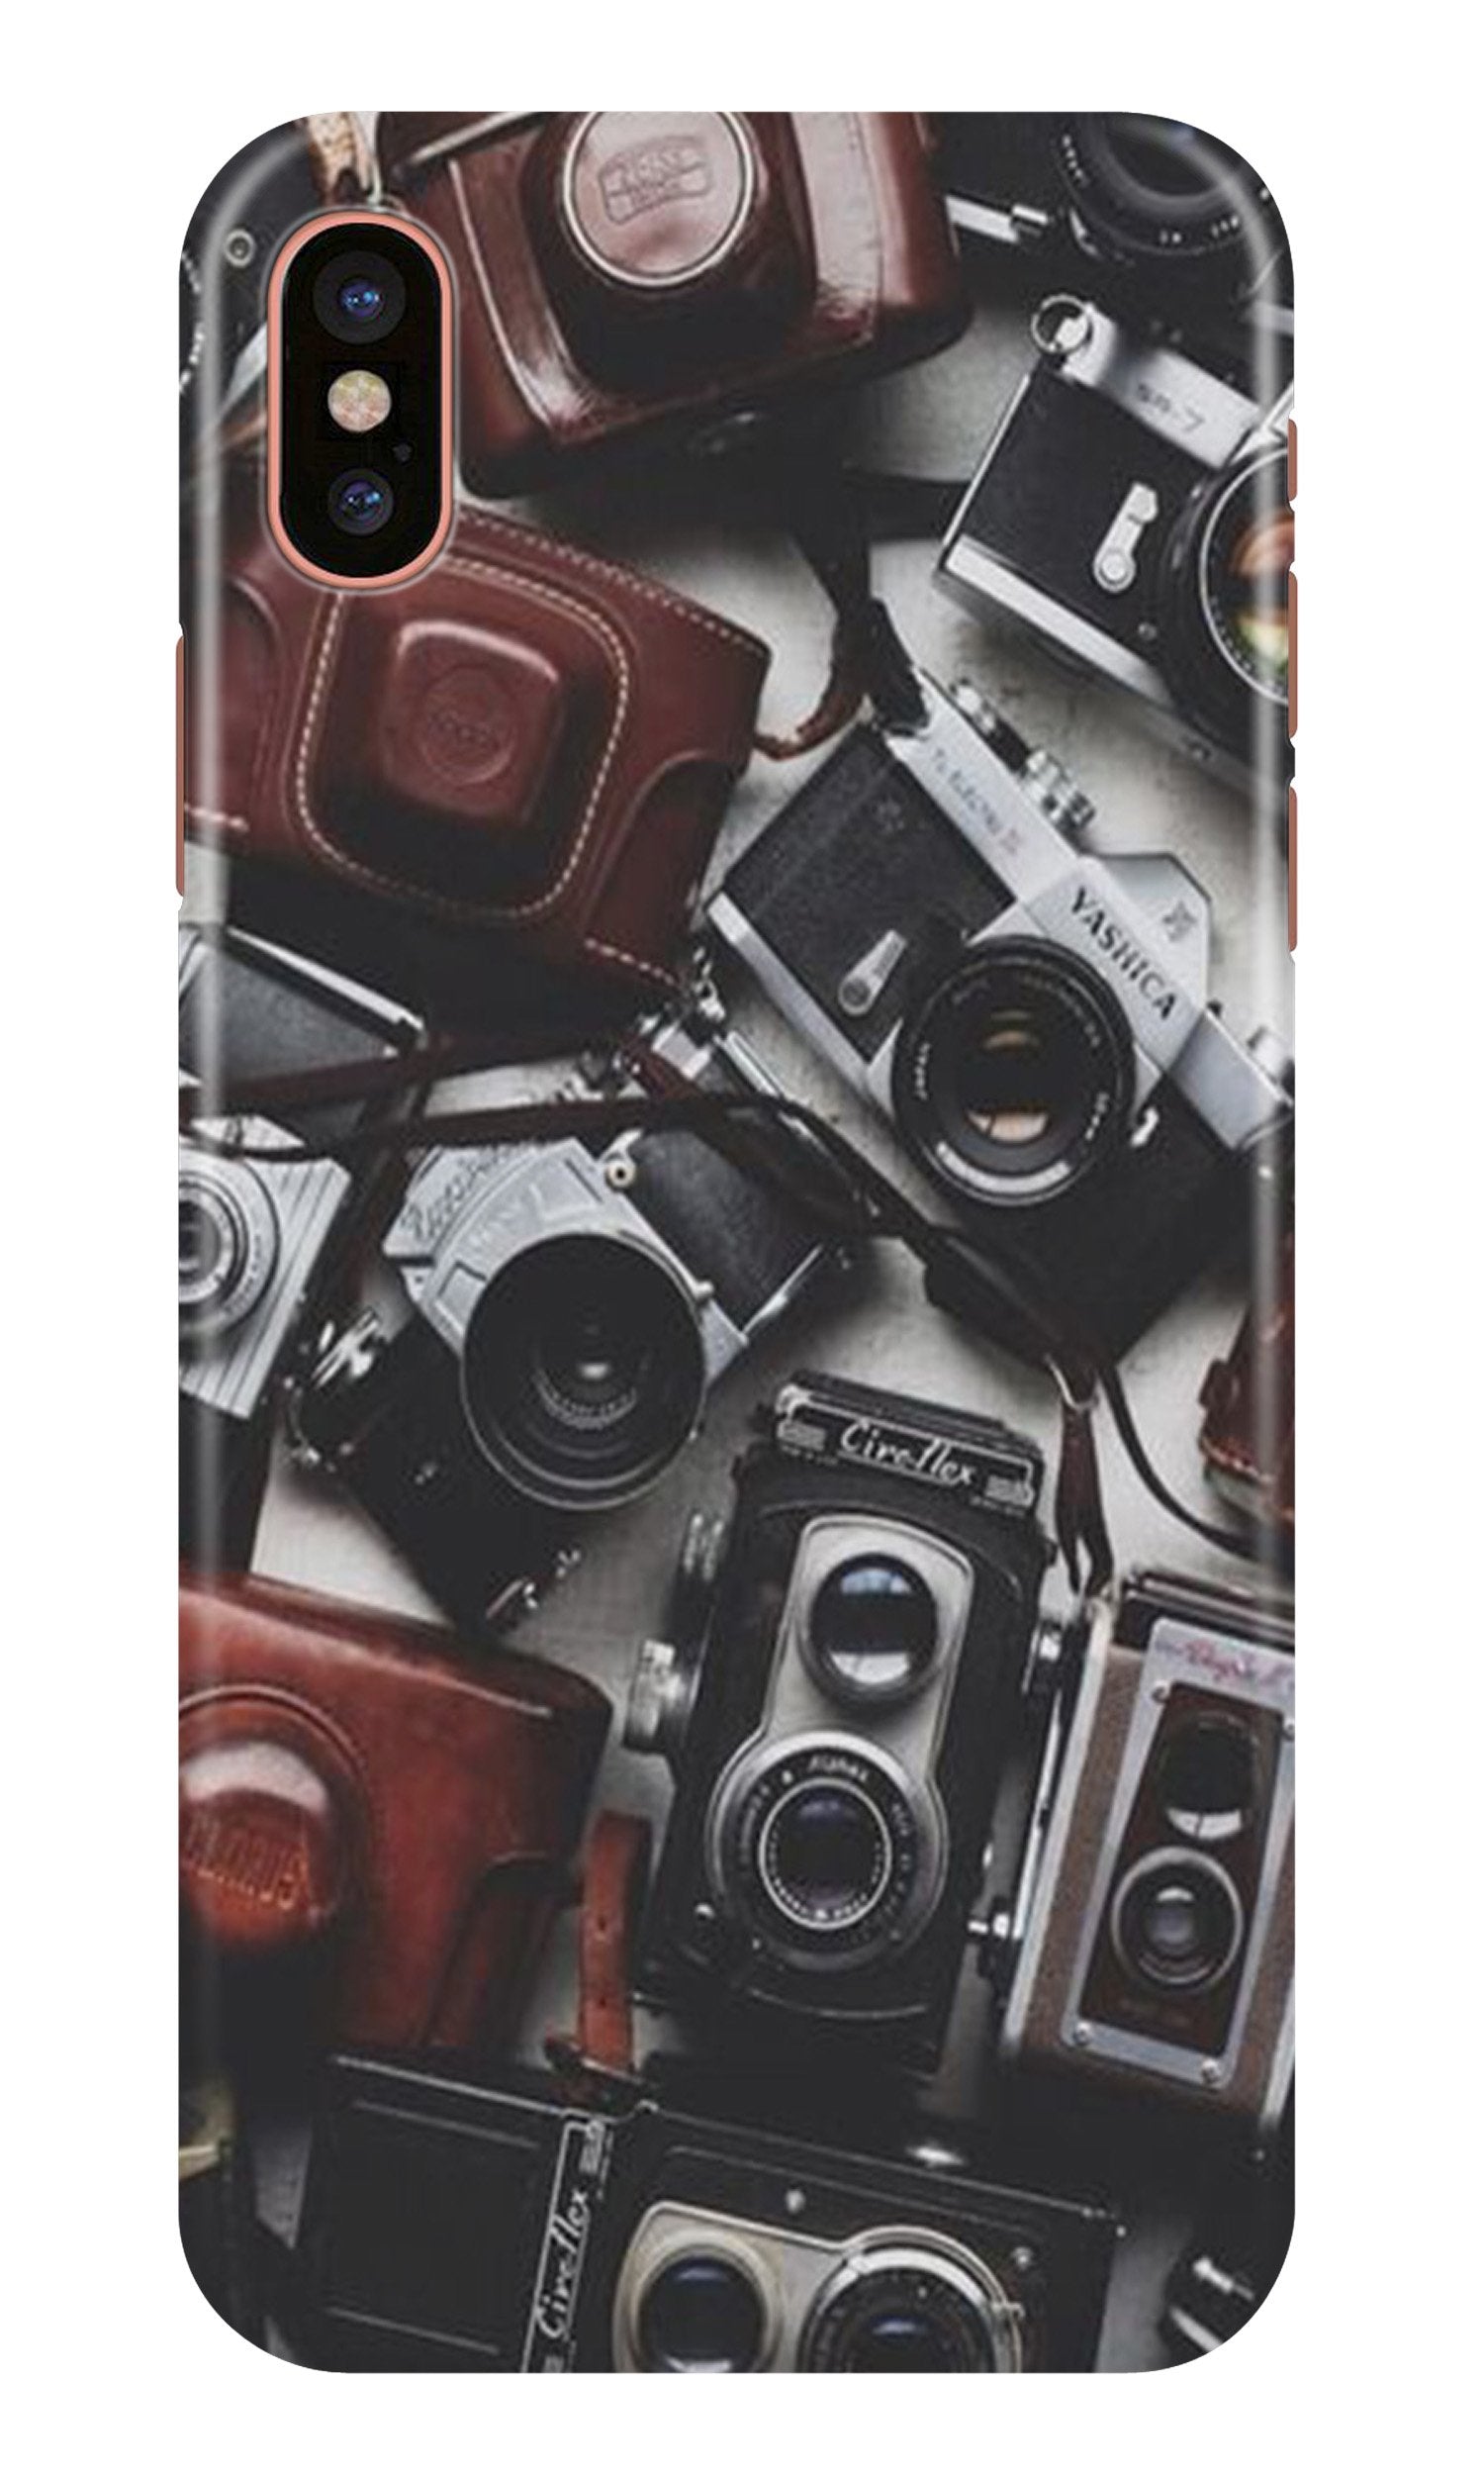 Cameras Case for iPhone X